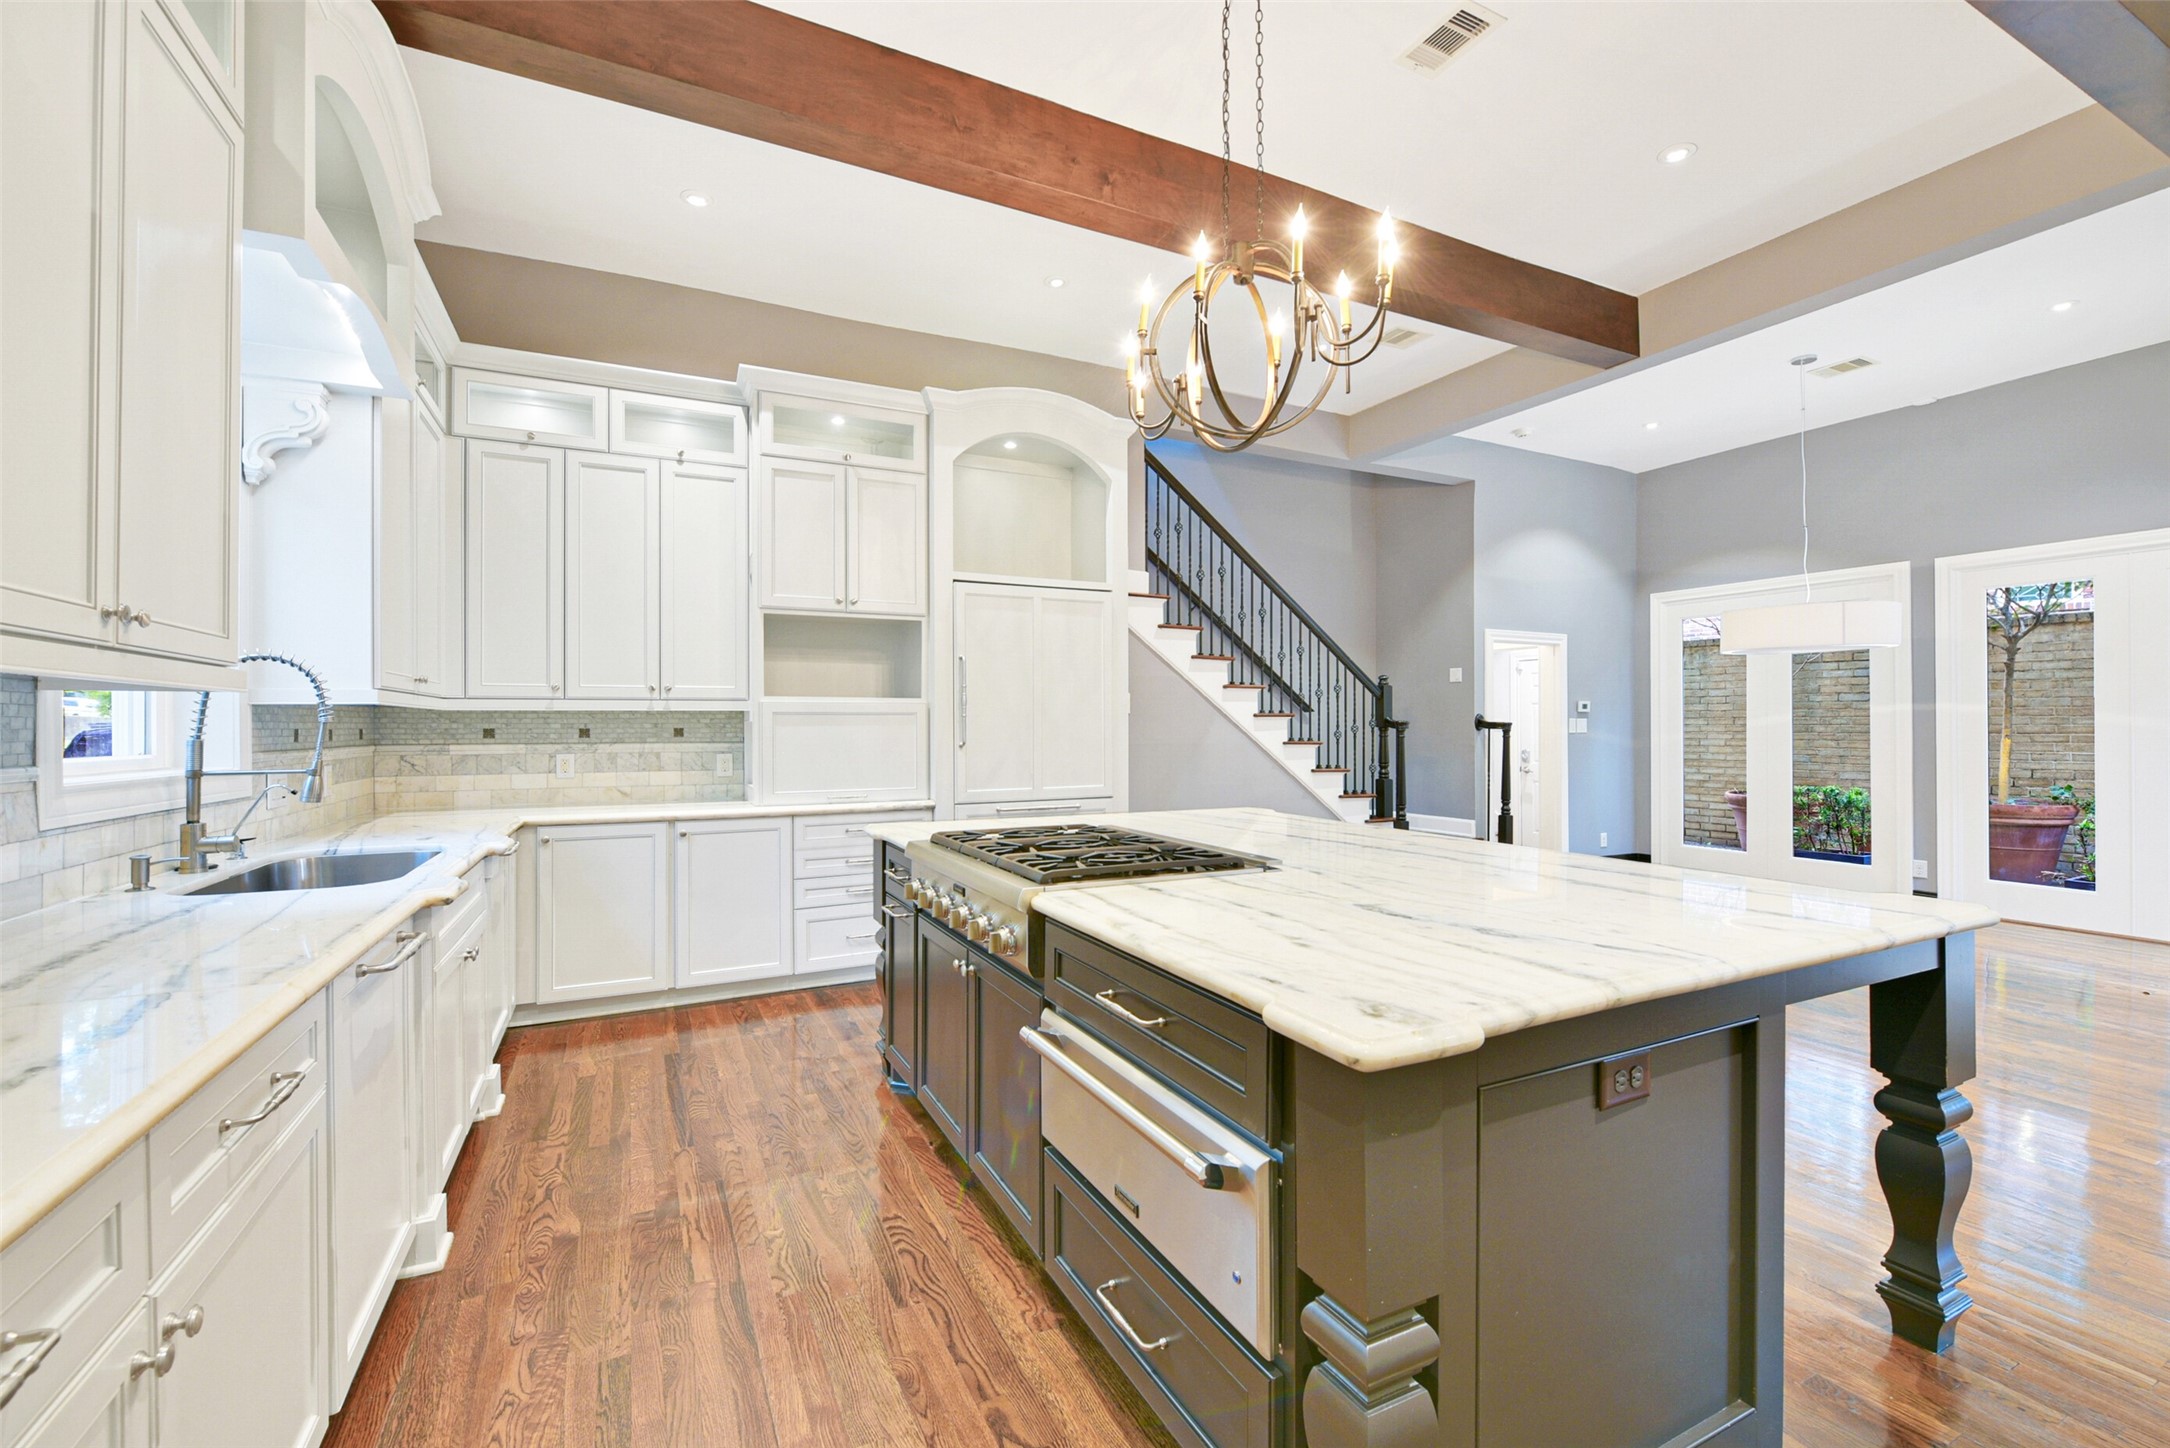 Carrara marble counter-tops and backsplash highlight the cabinetry and kitchen island. Upper cabinets are lighted for display. The island can seat four to five people comfortably. There are two staircases originating from the kitchen and morning room lead to the second floor, where a sense of privacy envelops the primary retreat.